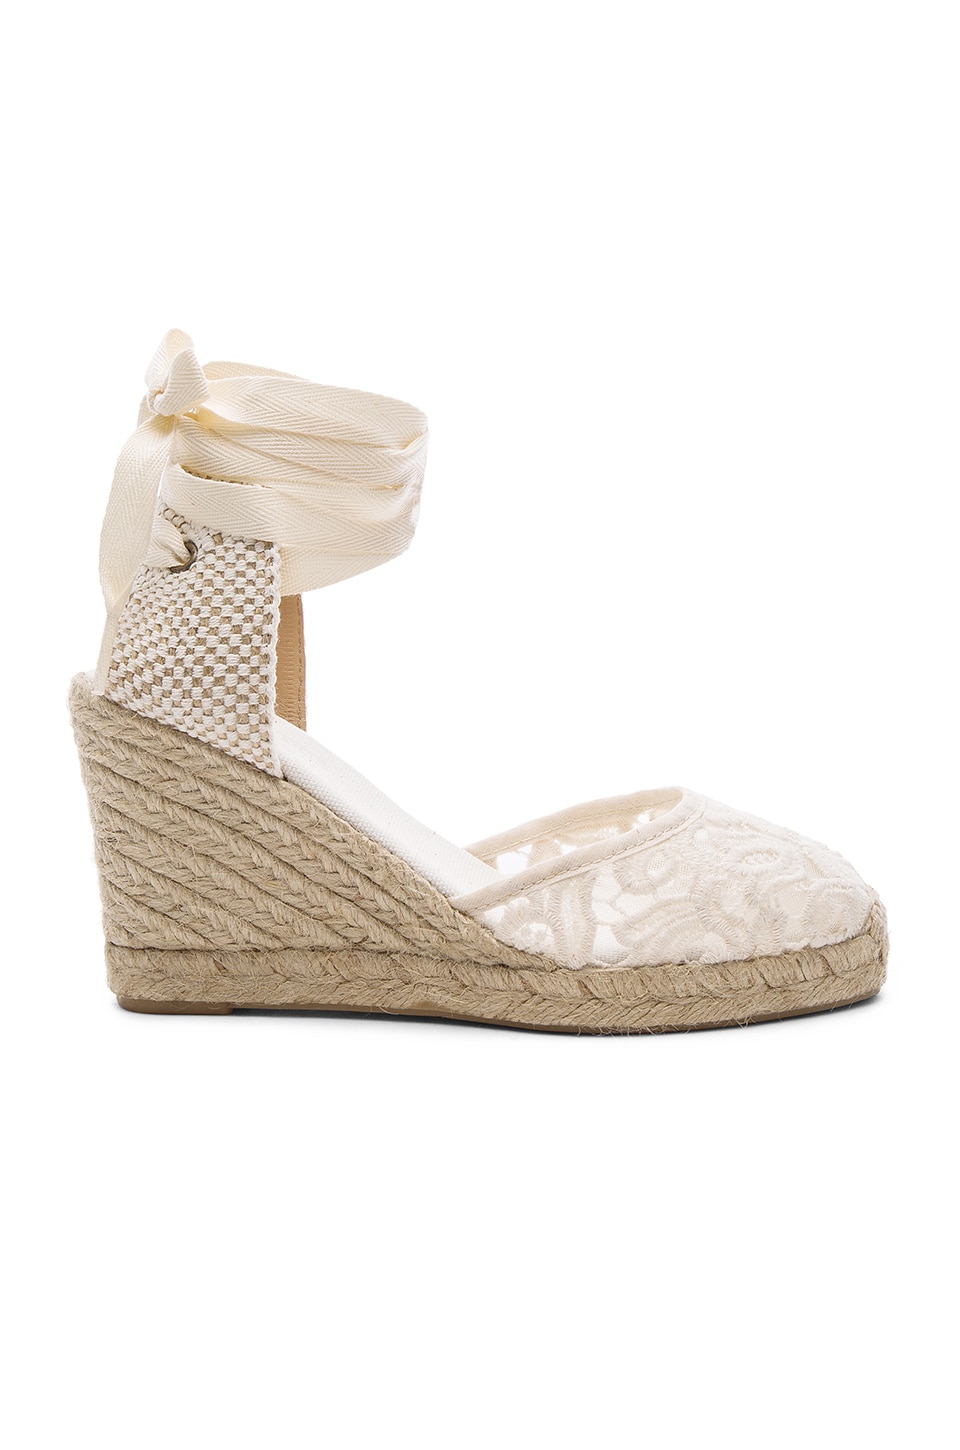 Soludos Tall Wedge in Ivory | REVOLVE